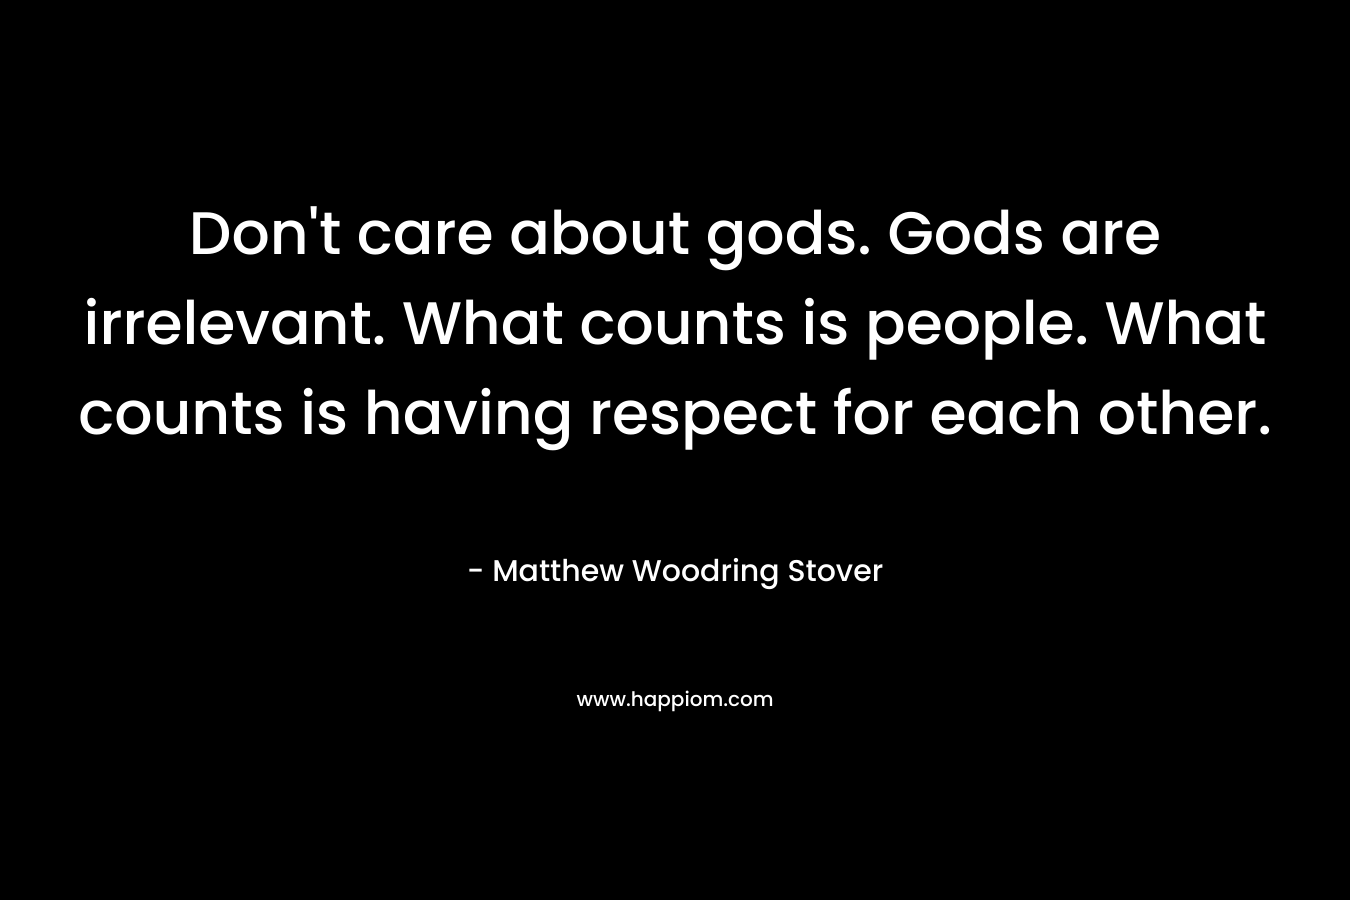 Don’t care about gods. Gods are irrelevant. What counts is people. What counts is having respect for each other. – Matthew Woodring Stover